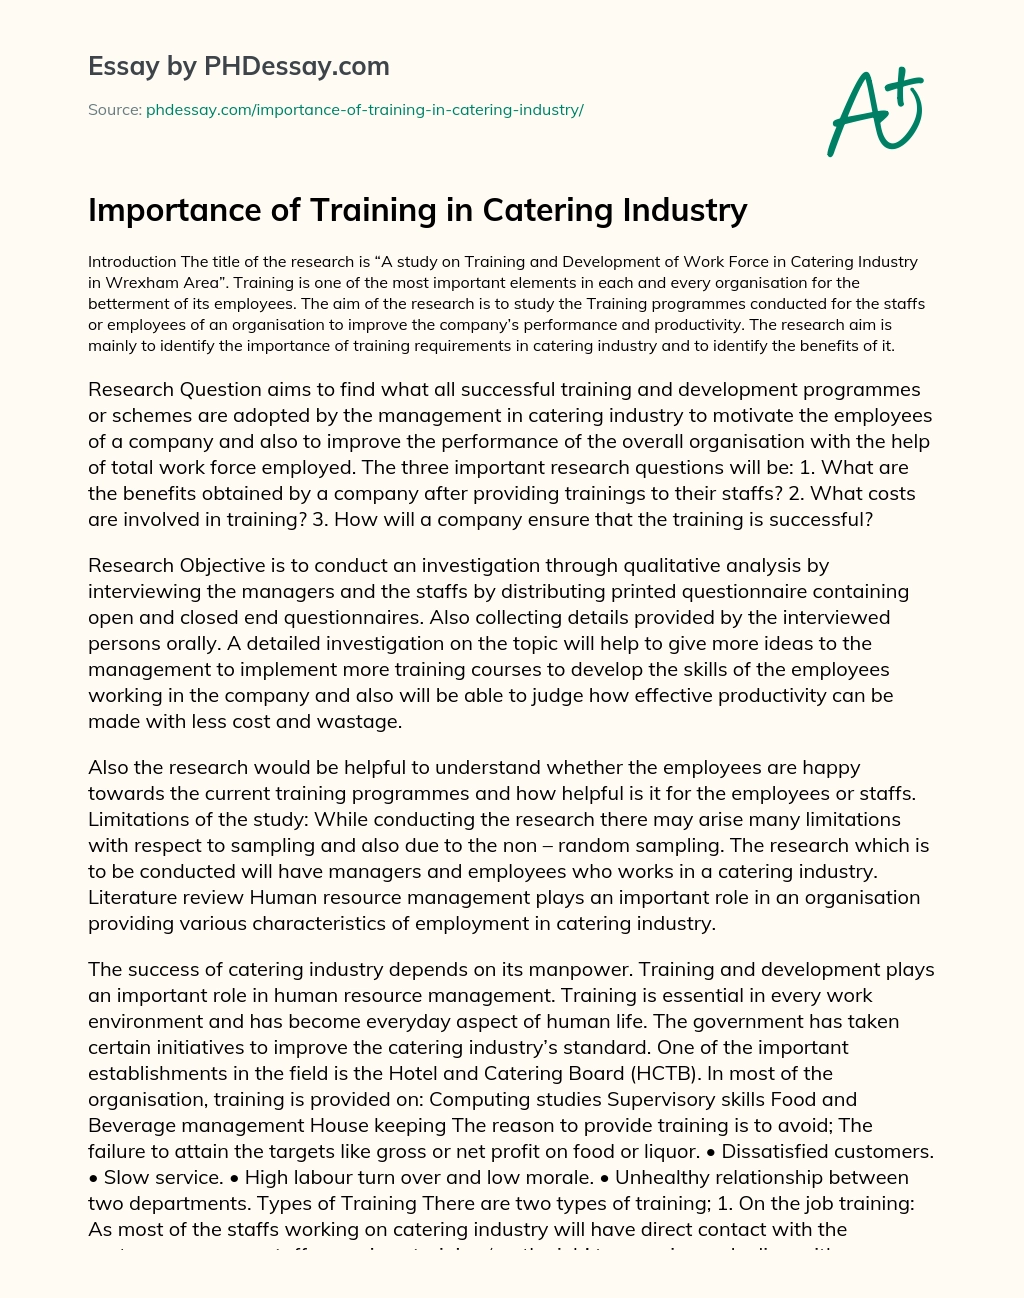 Importance of Training in Catering Industry essay